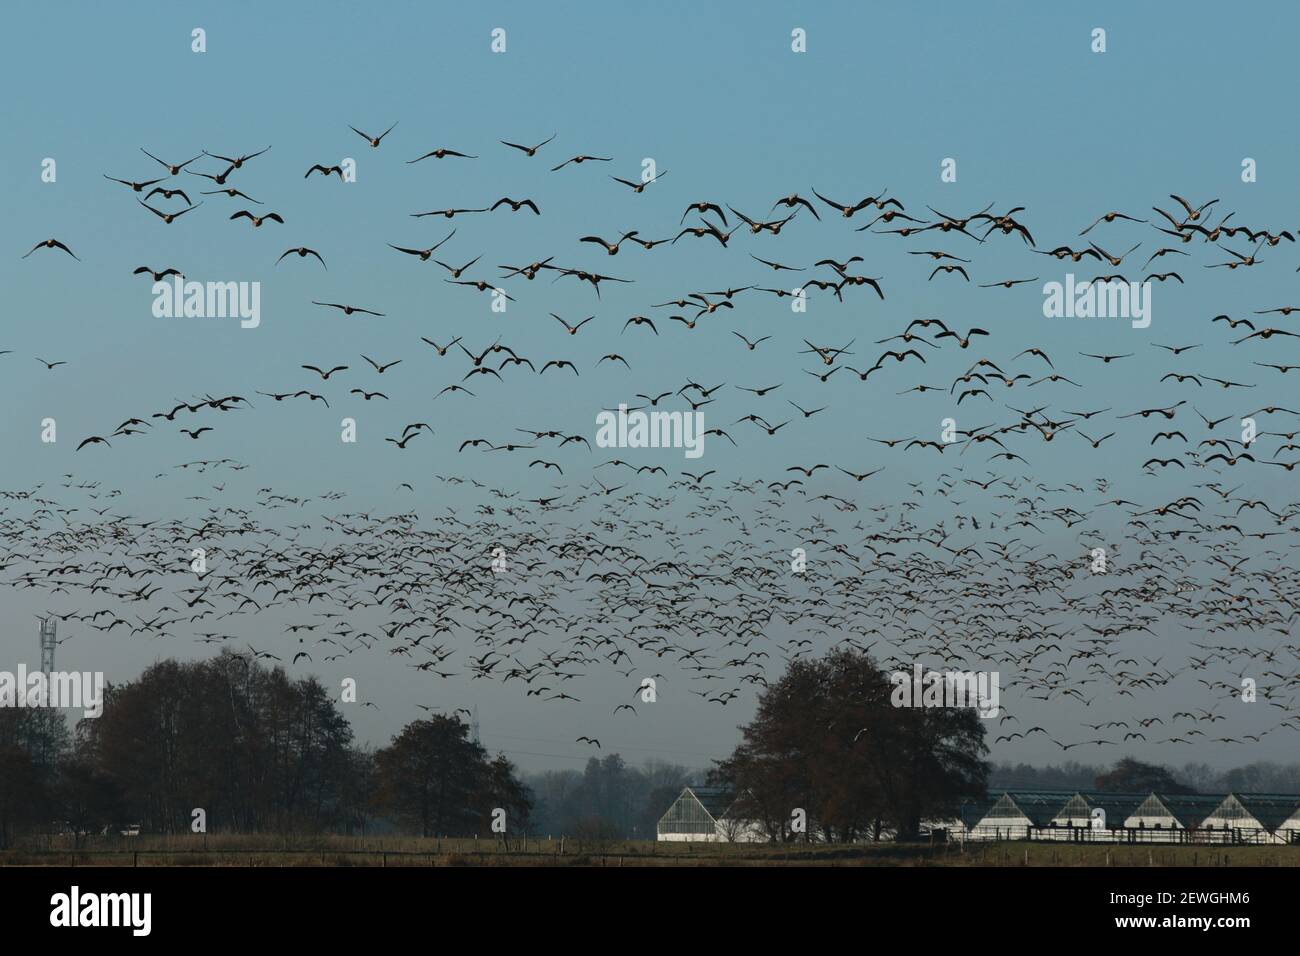 A flock of migratory birds in the sky Stock Photo